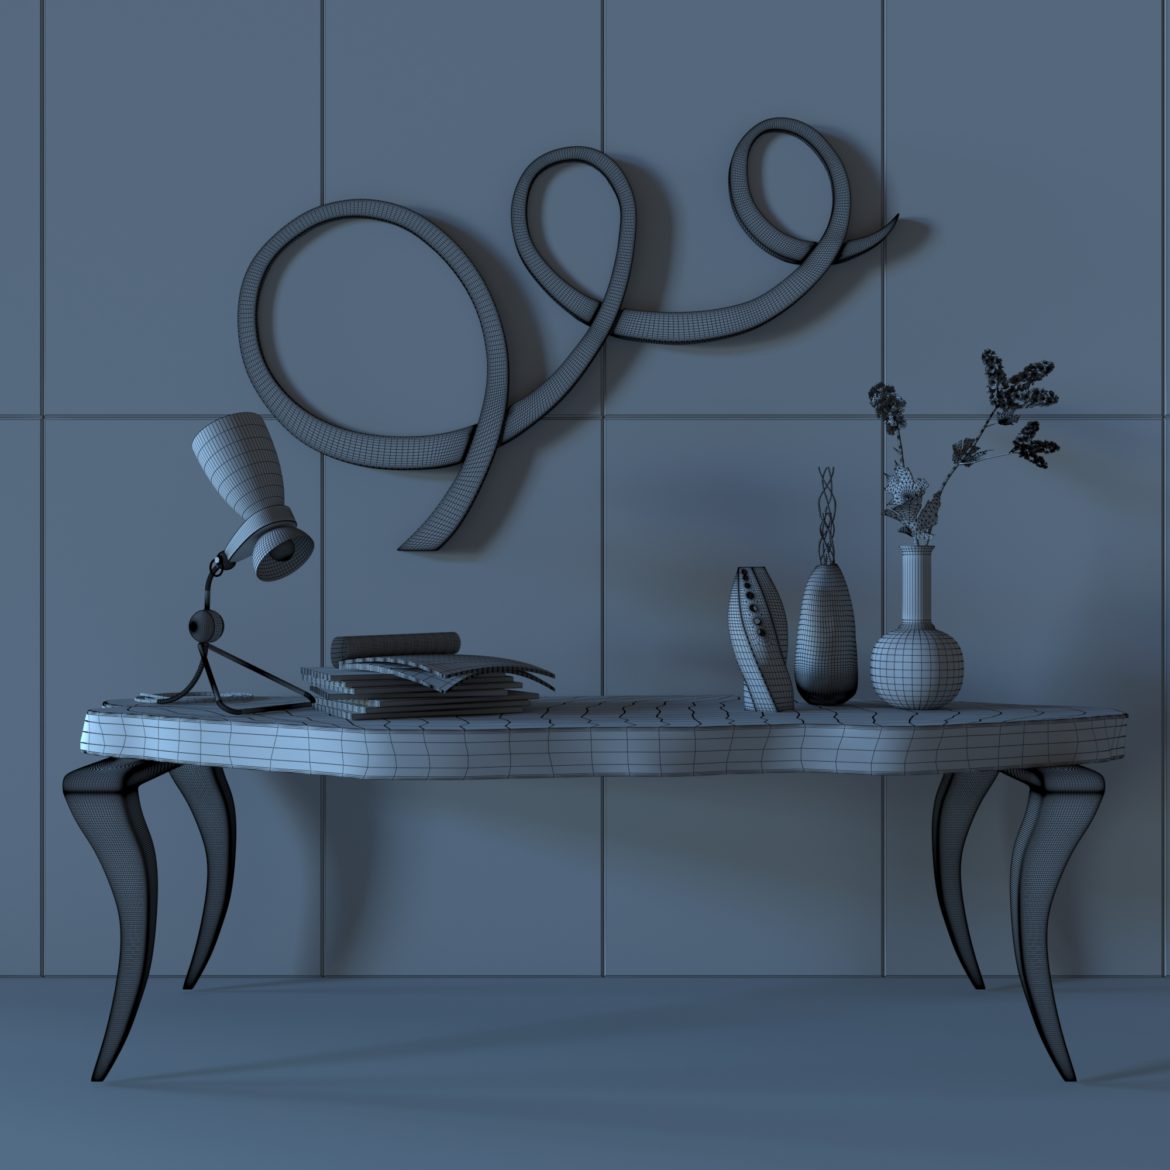 table and mirror-16 3d model max obj 295989